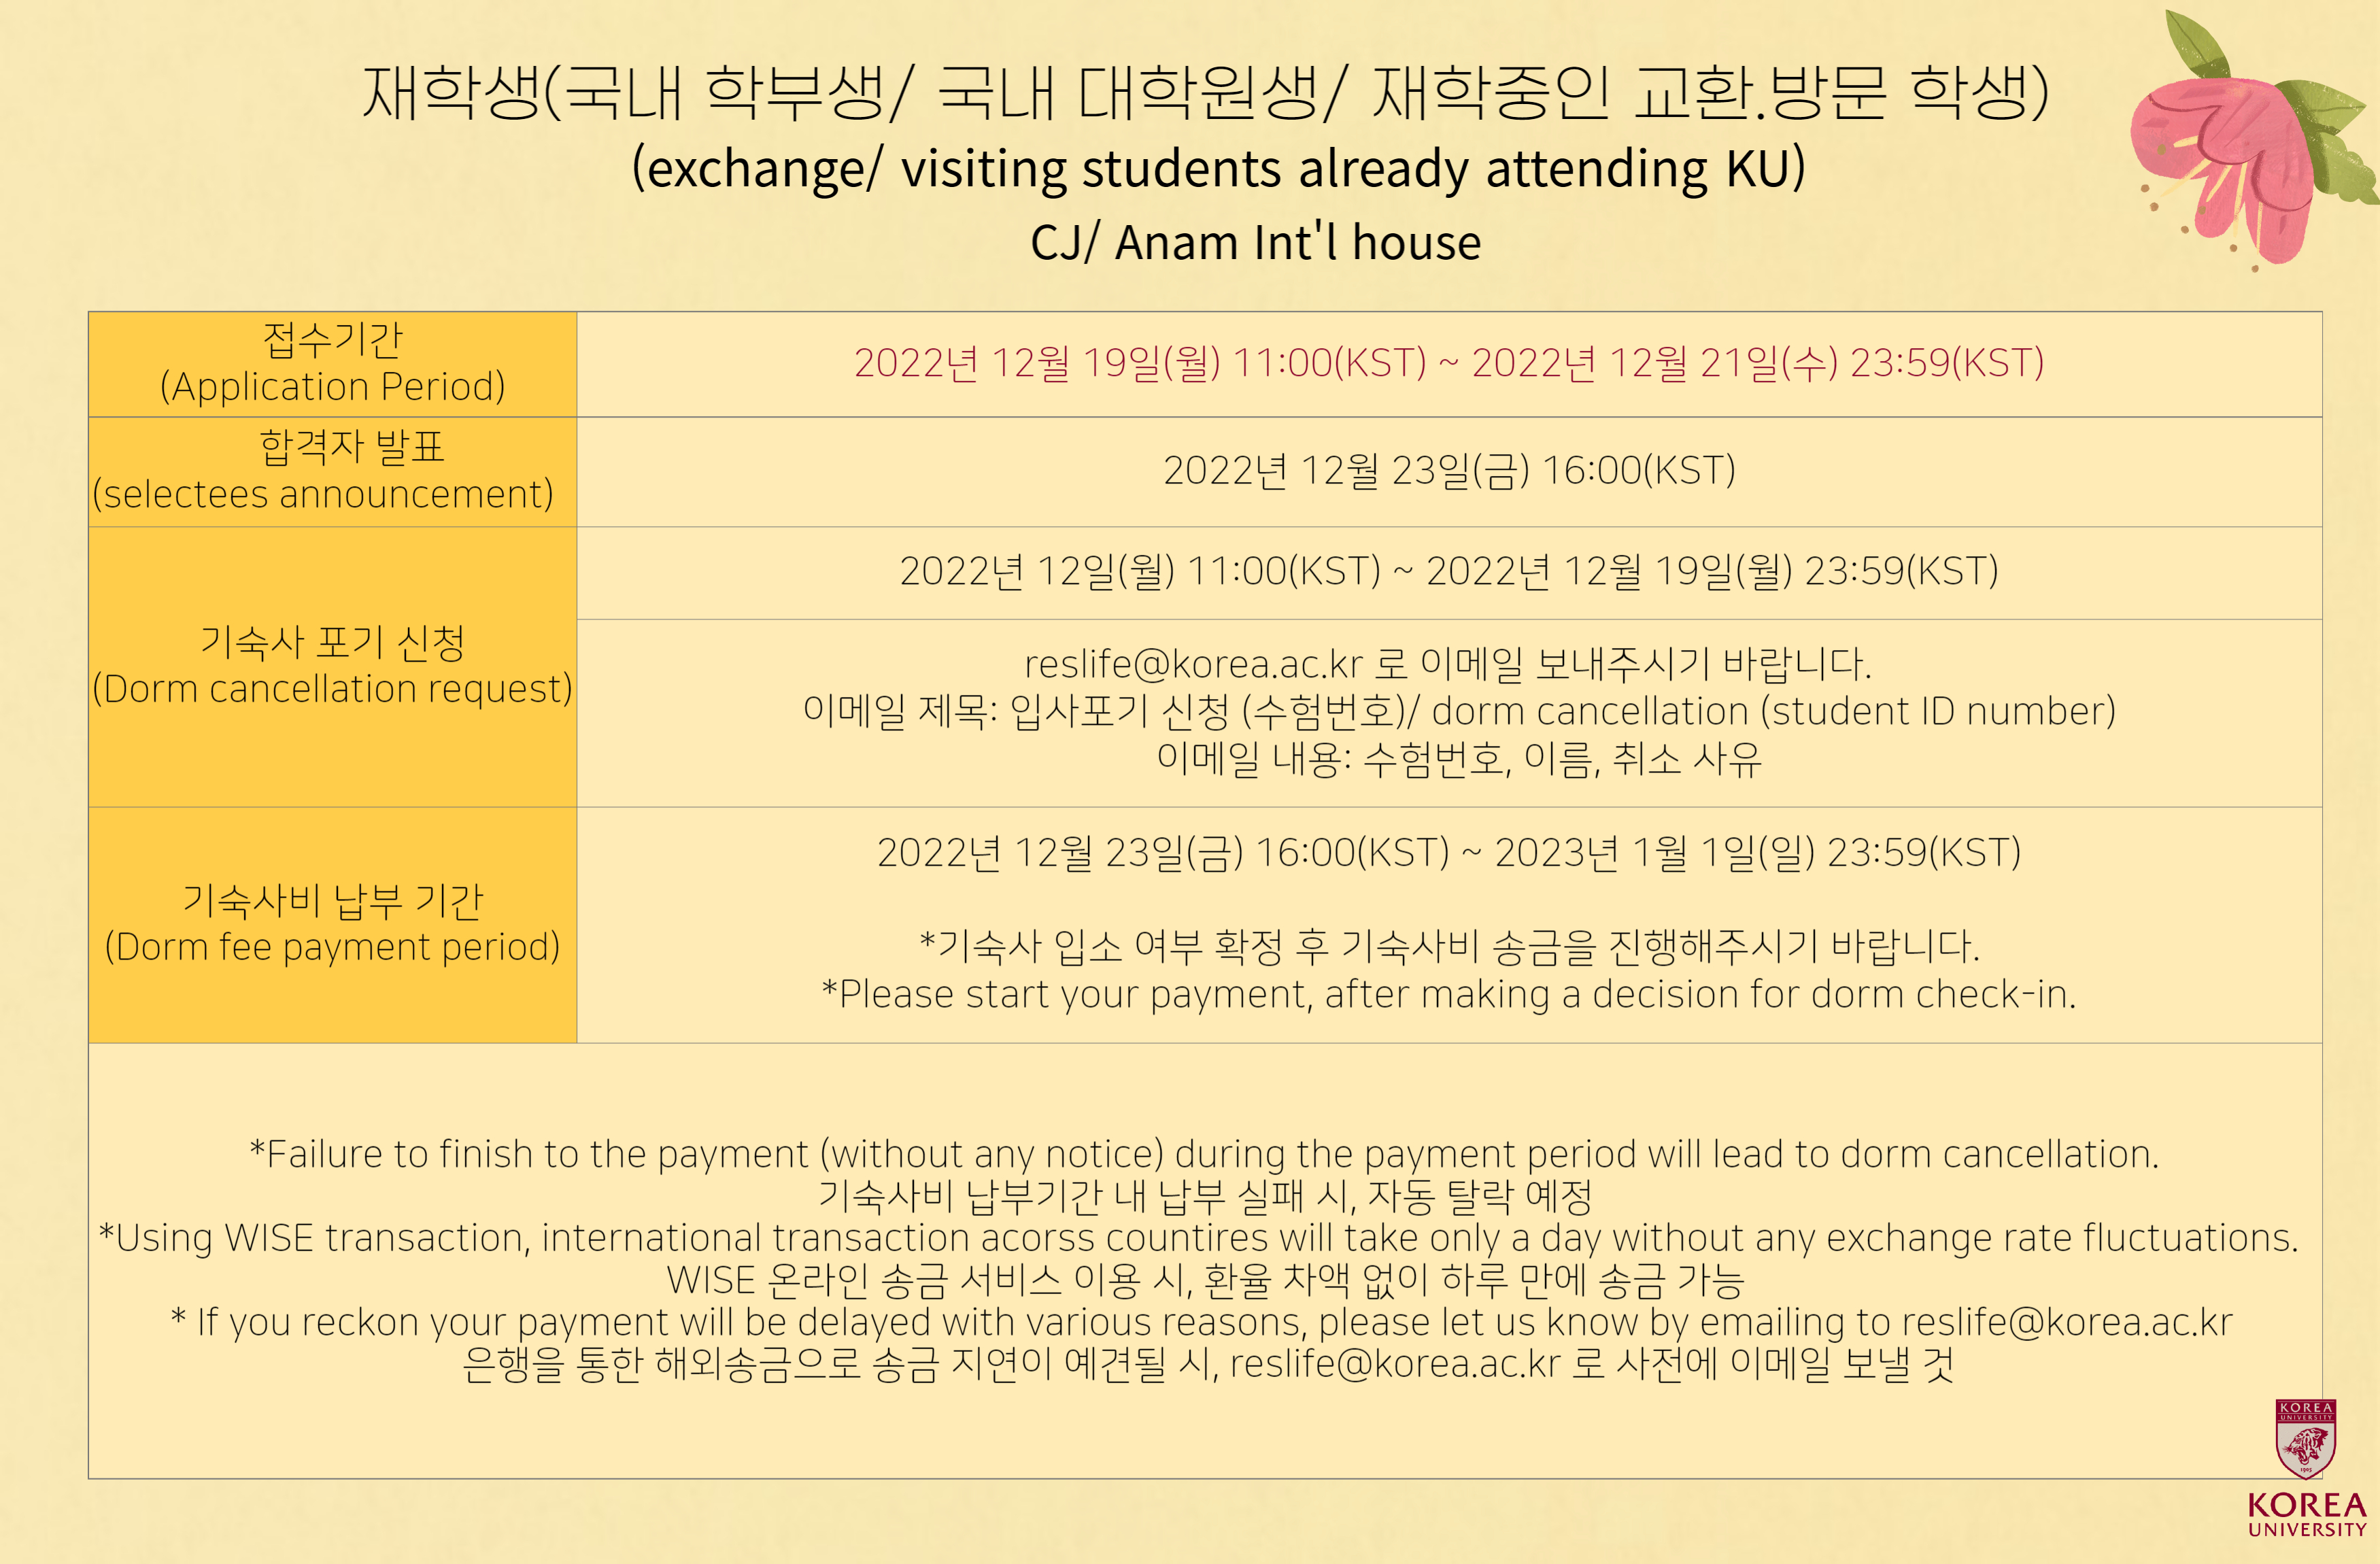 [CJ/Anam Int'l House] 2023 SPRING SESSION NOTICE & Application Instruction 이미지